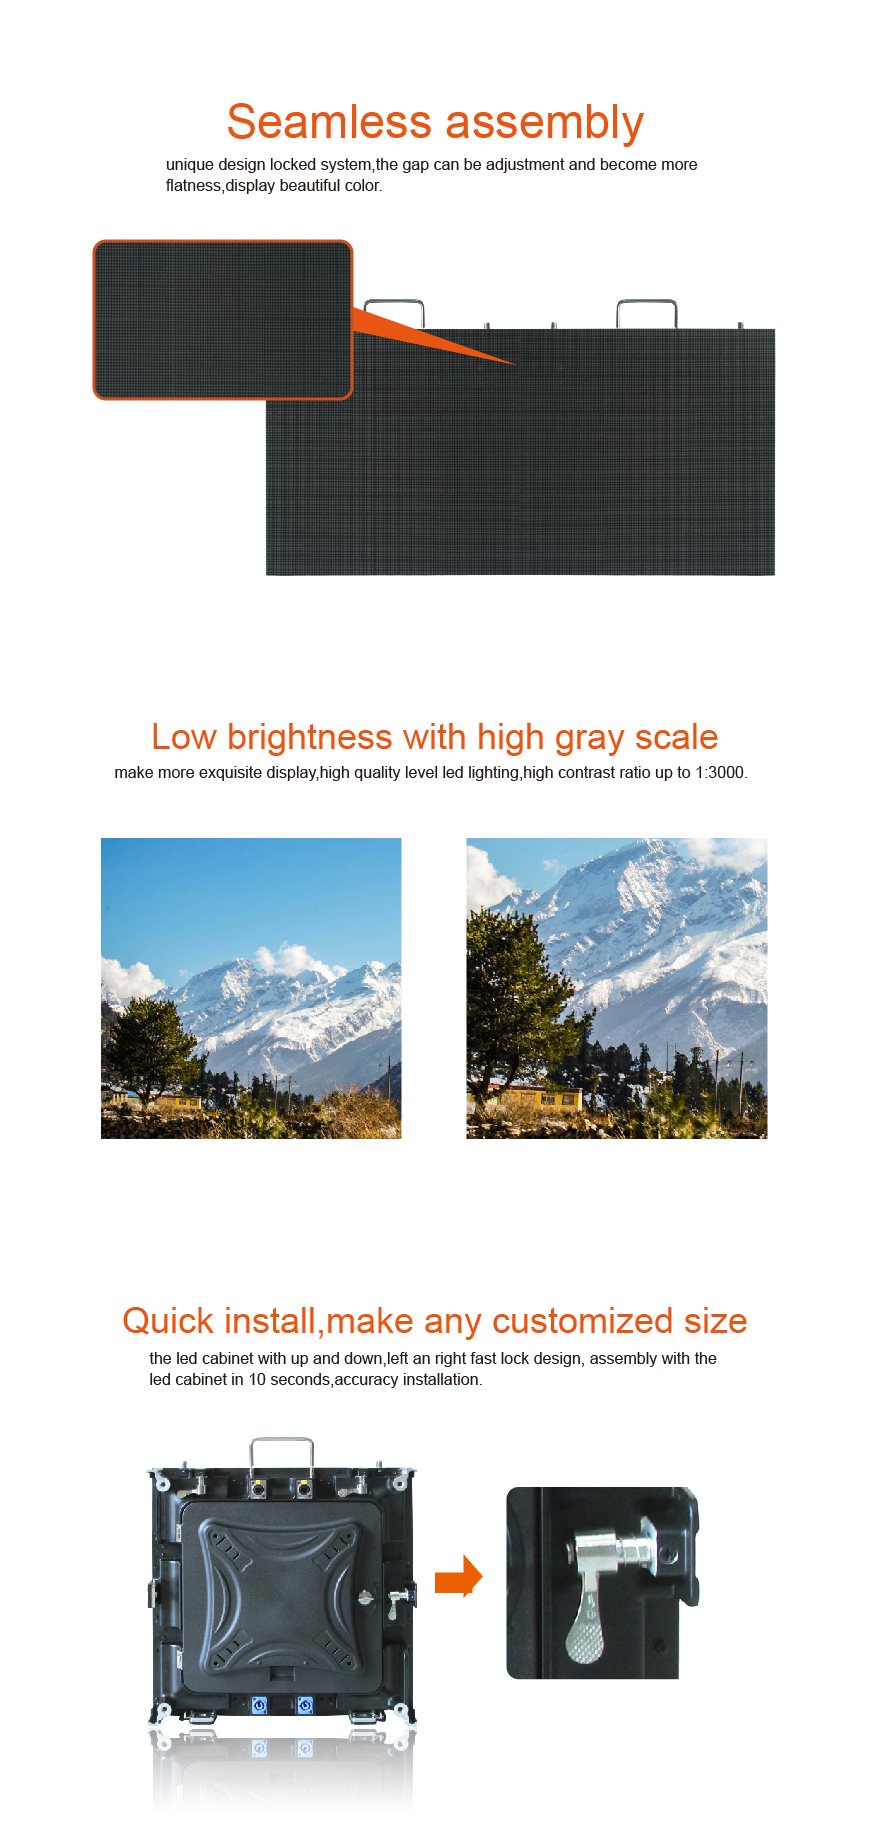 P2 High definition Led display HS-LDP2IN - Led display - 6